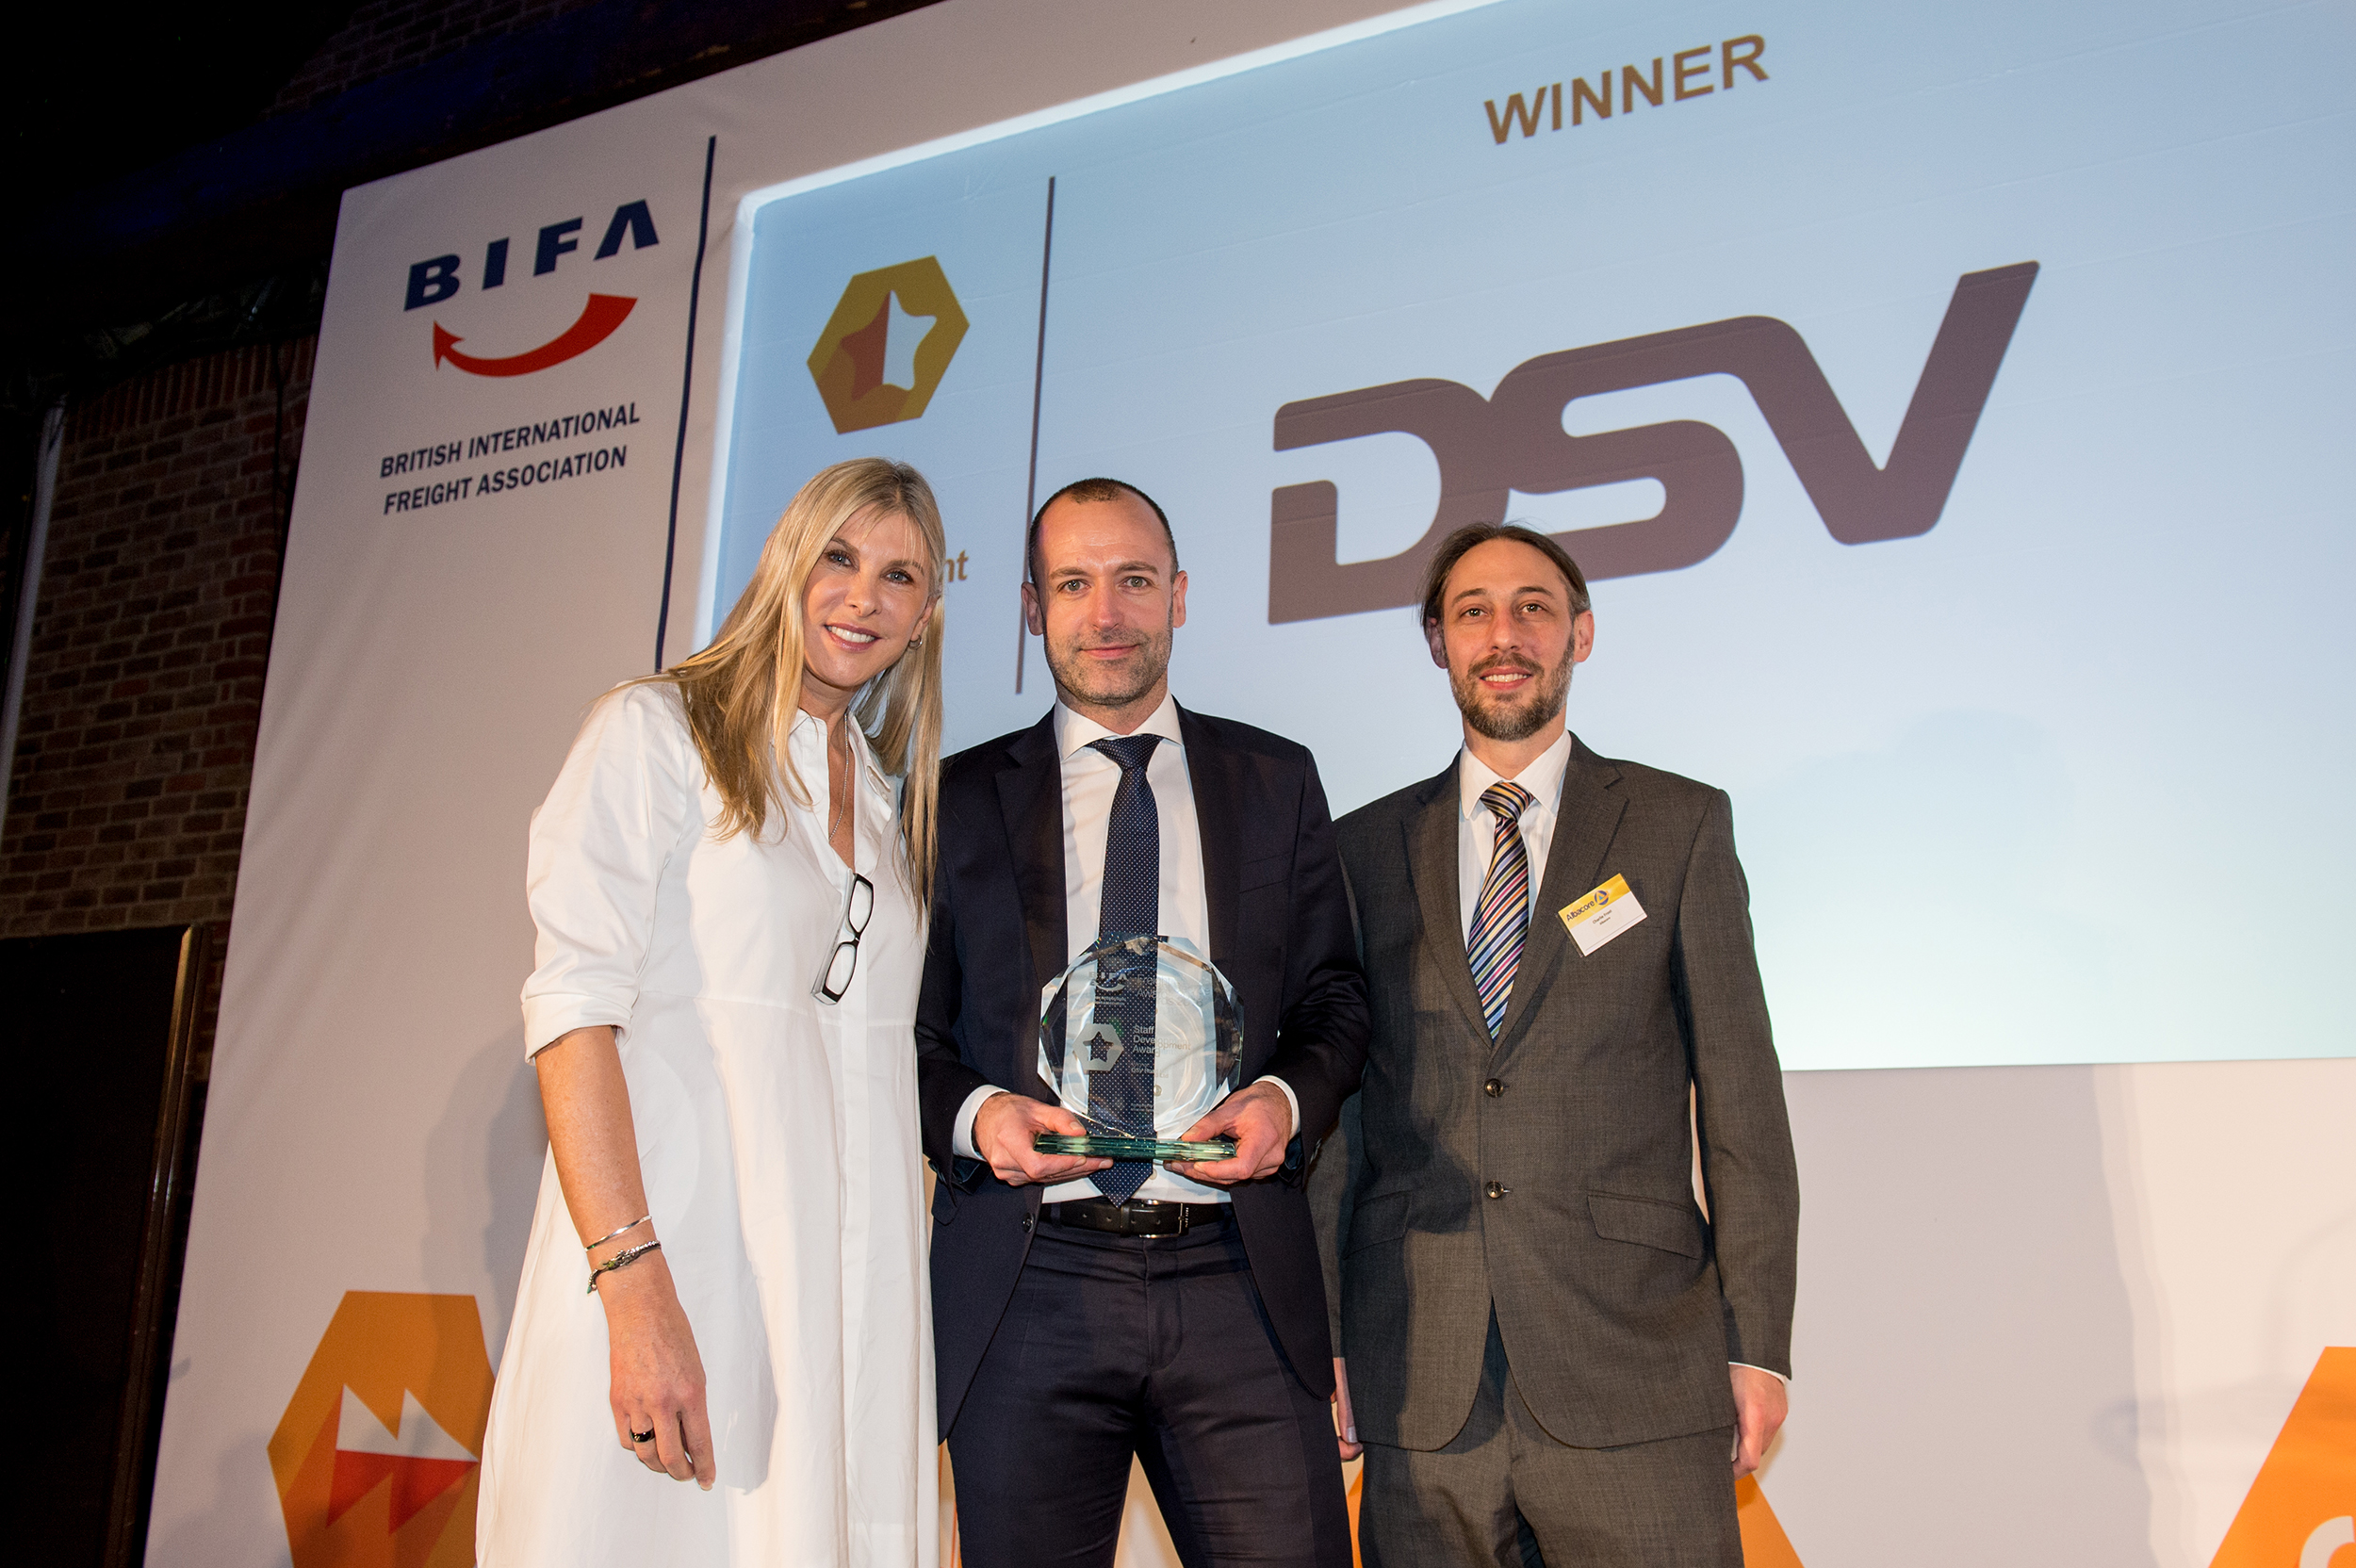 DSV – win, CCL – Highly commended